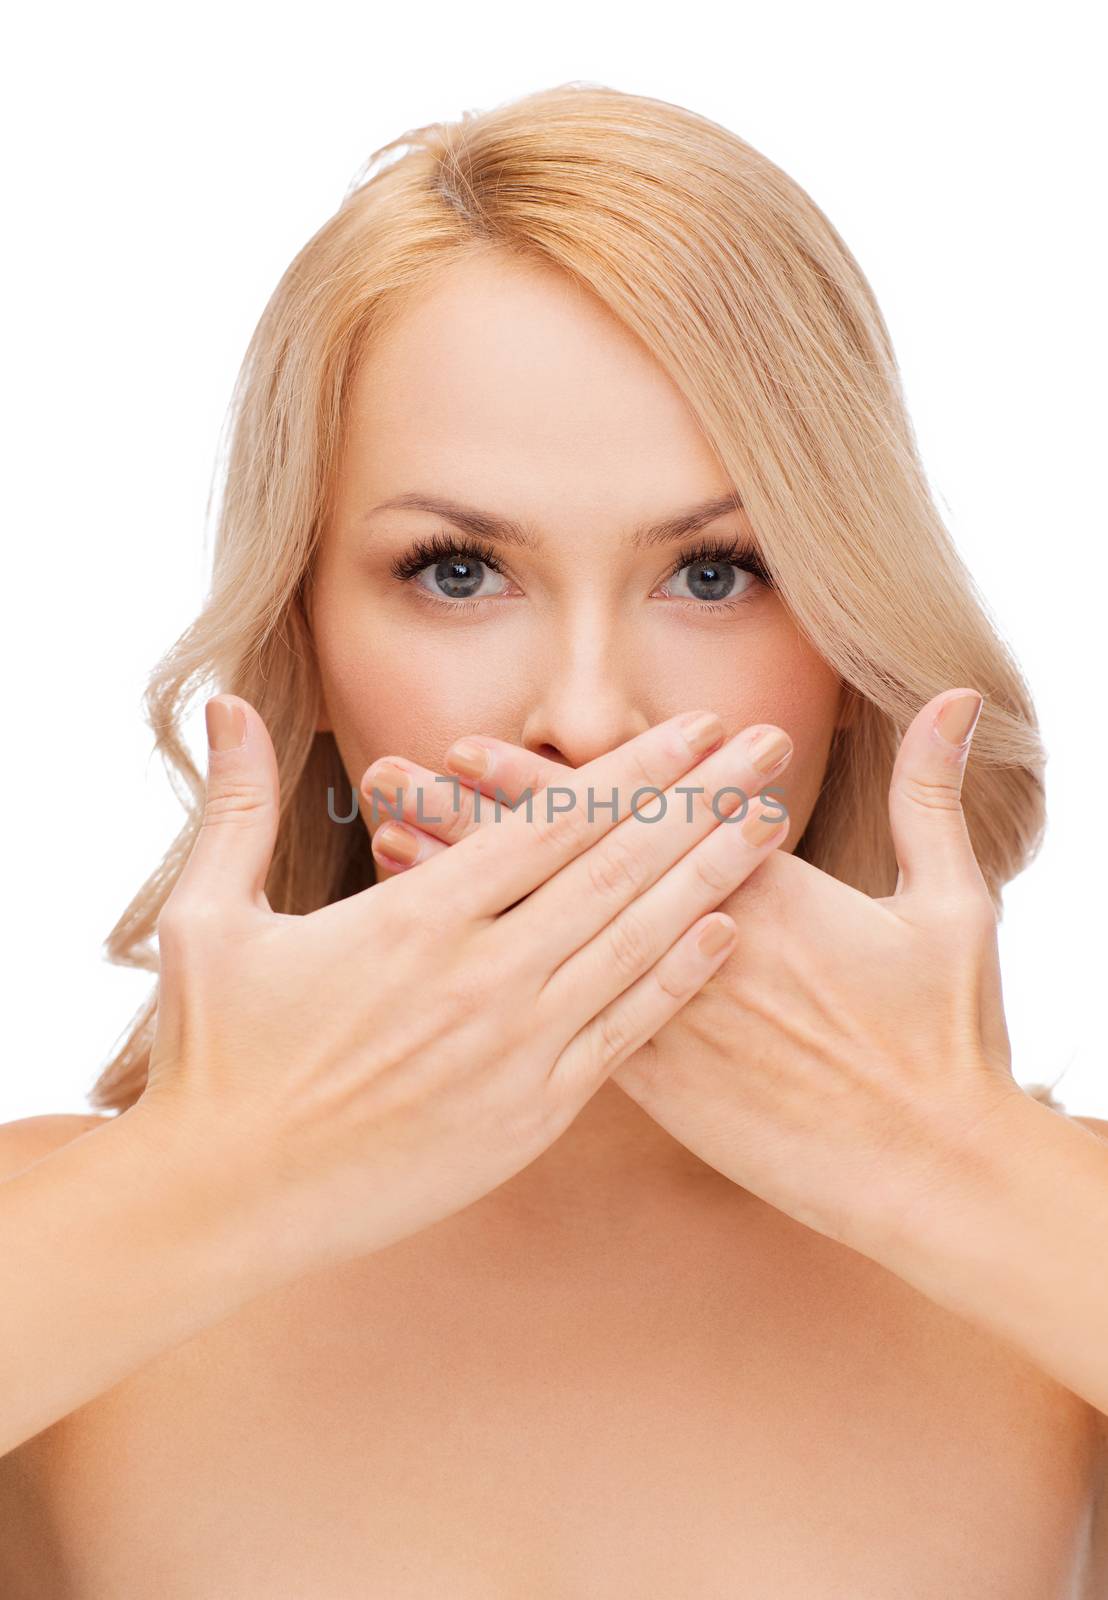 spa, health and beauty concept - beautiful woman covering her mouth